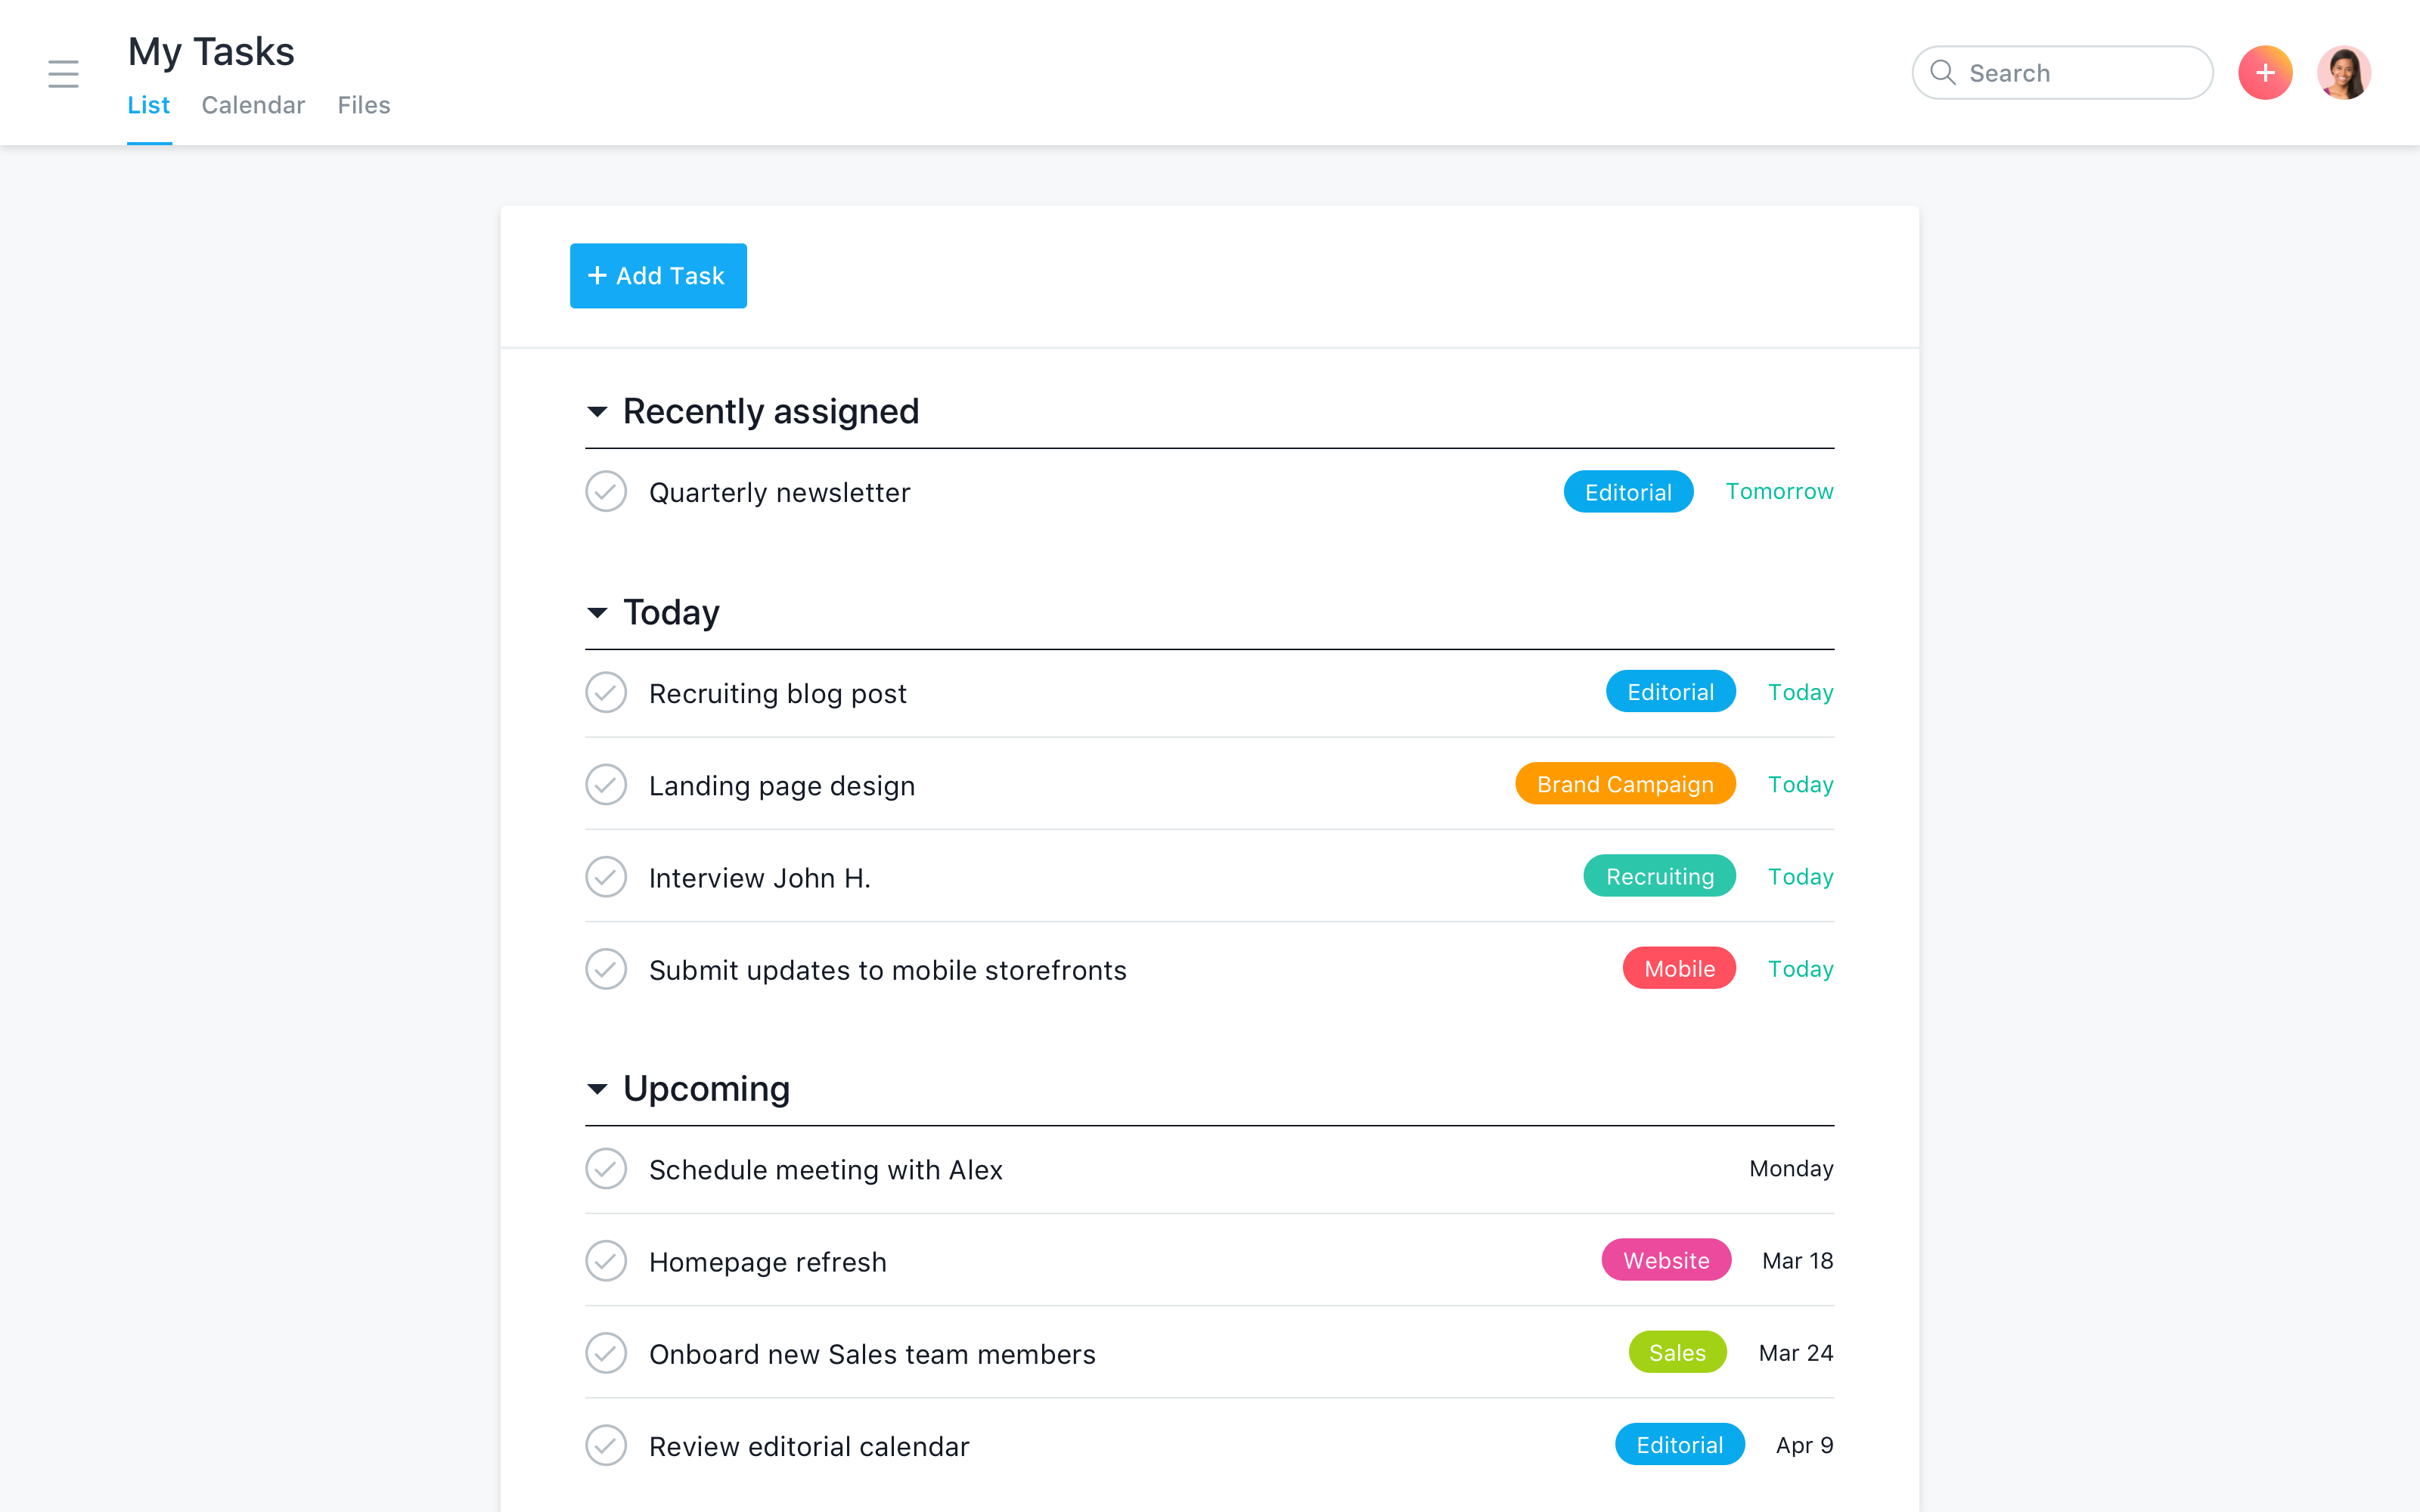 Create customizable to-do lists to prioritize and organize work in your My Tasks.